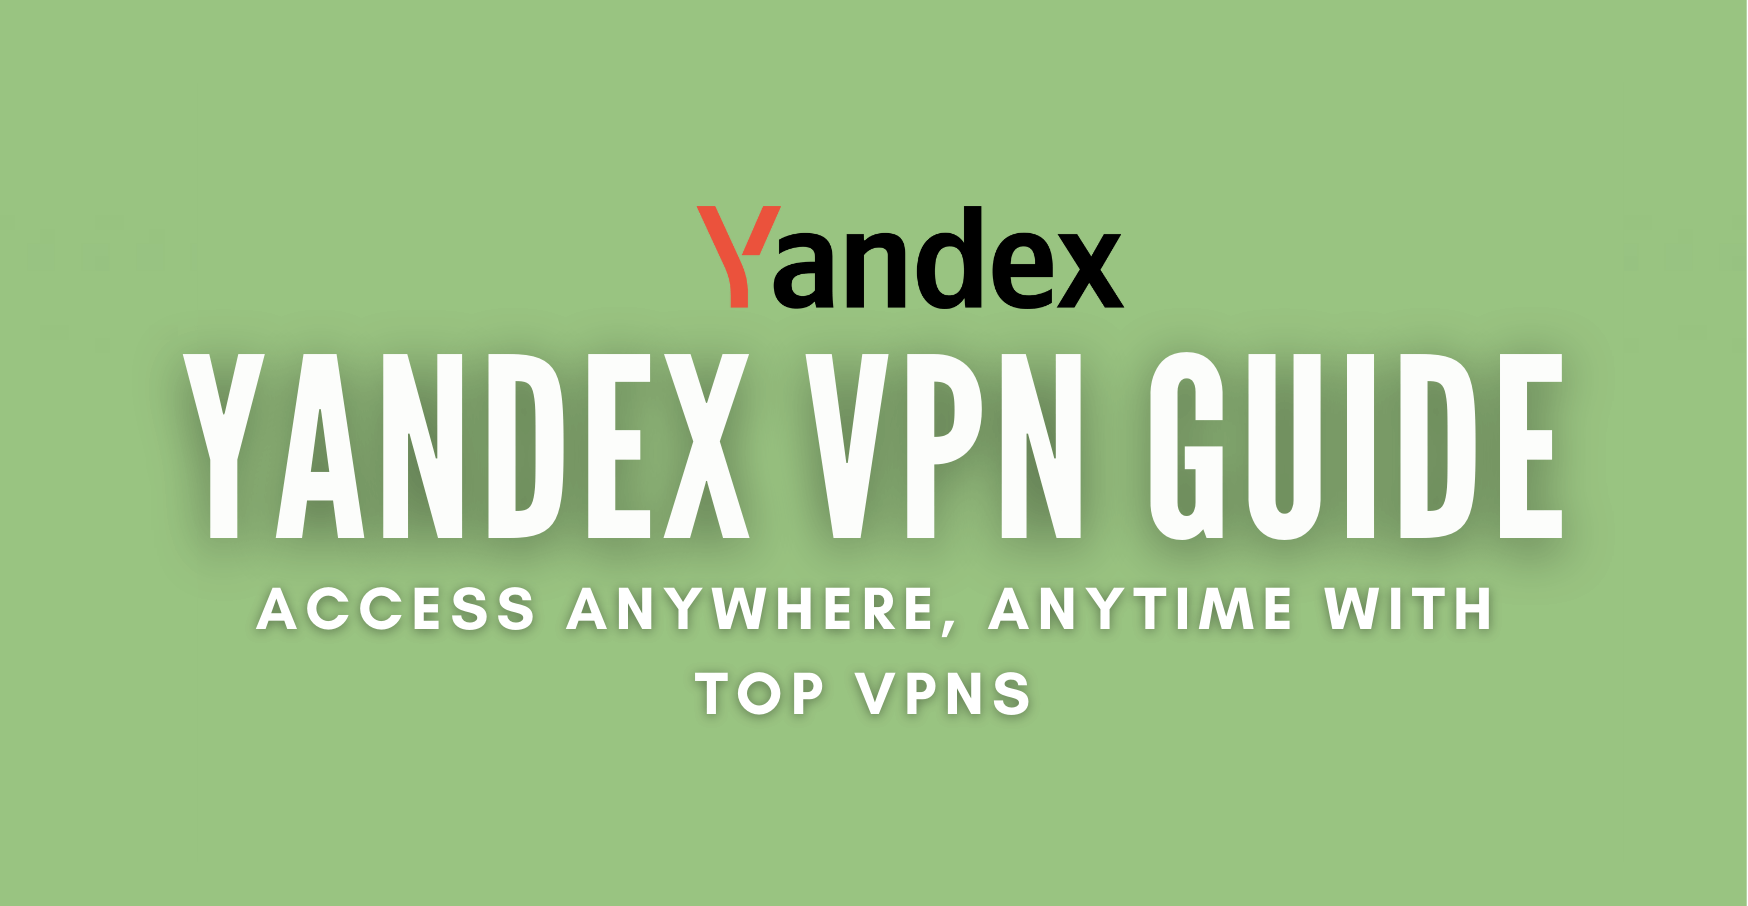 Complete Yandex Games Unblocked Guide